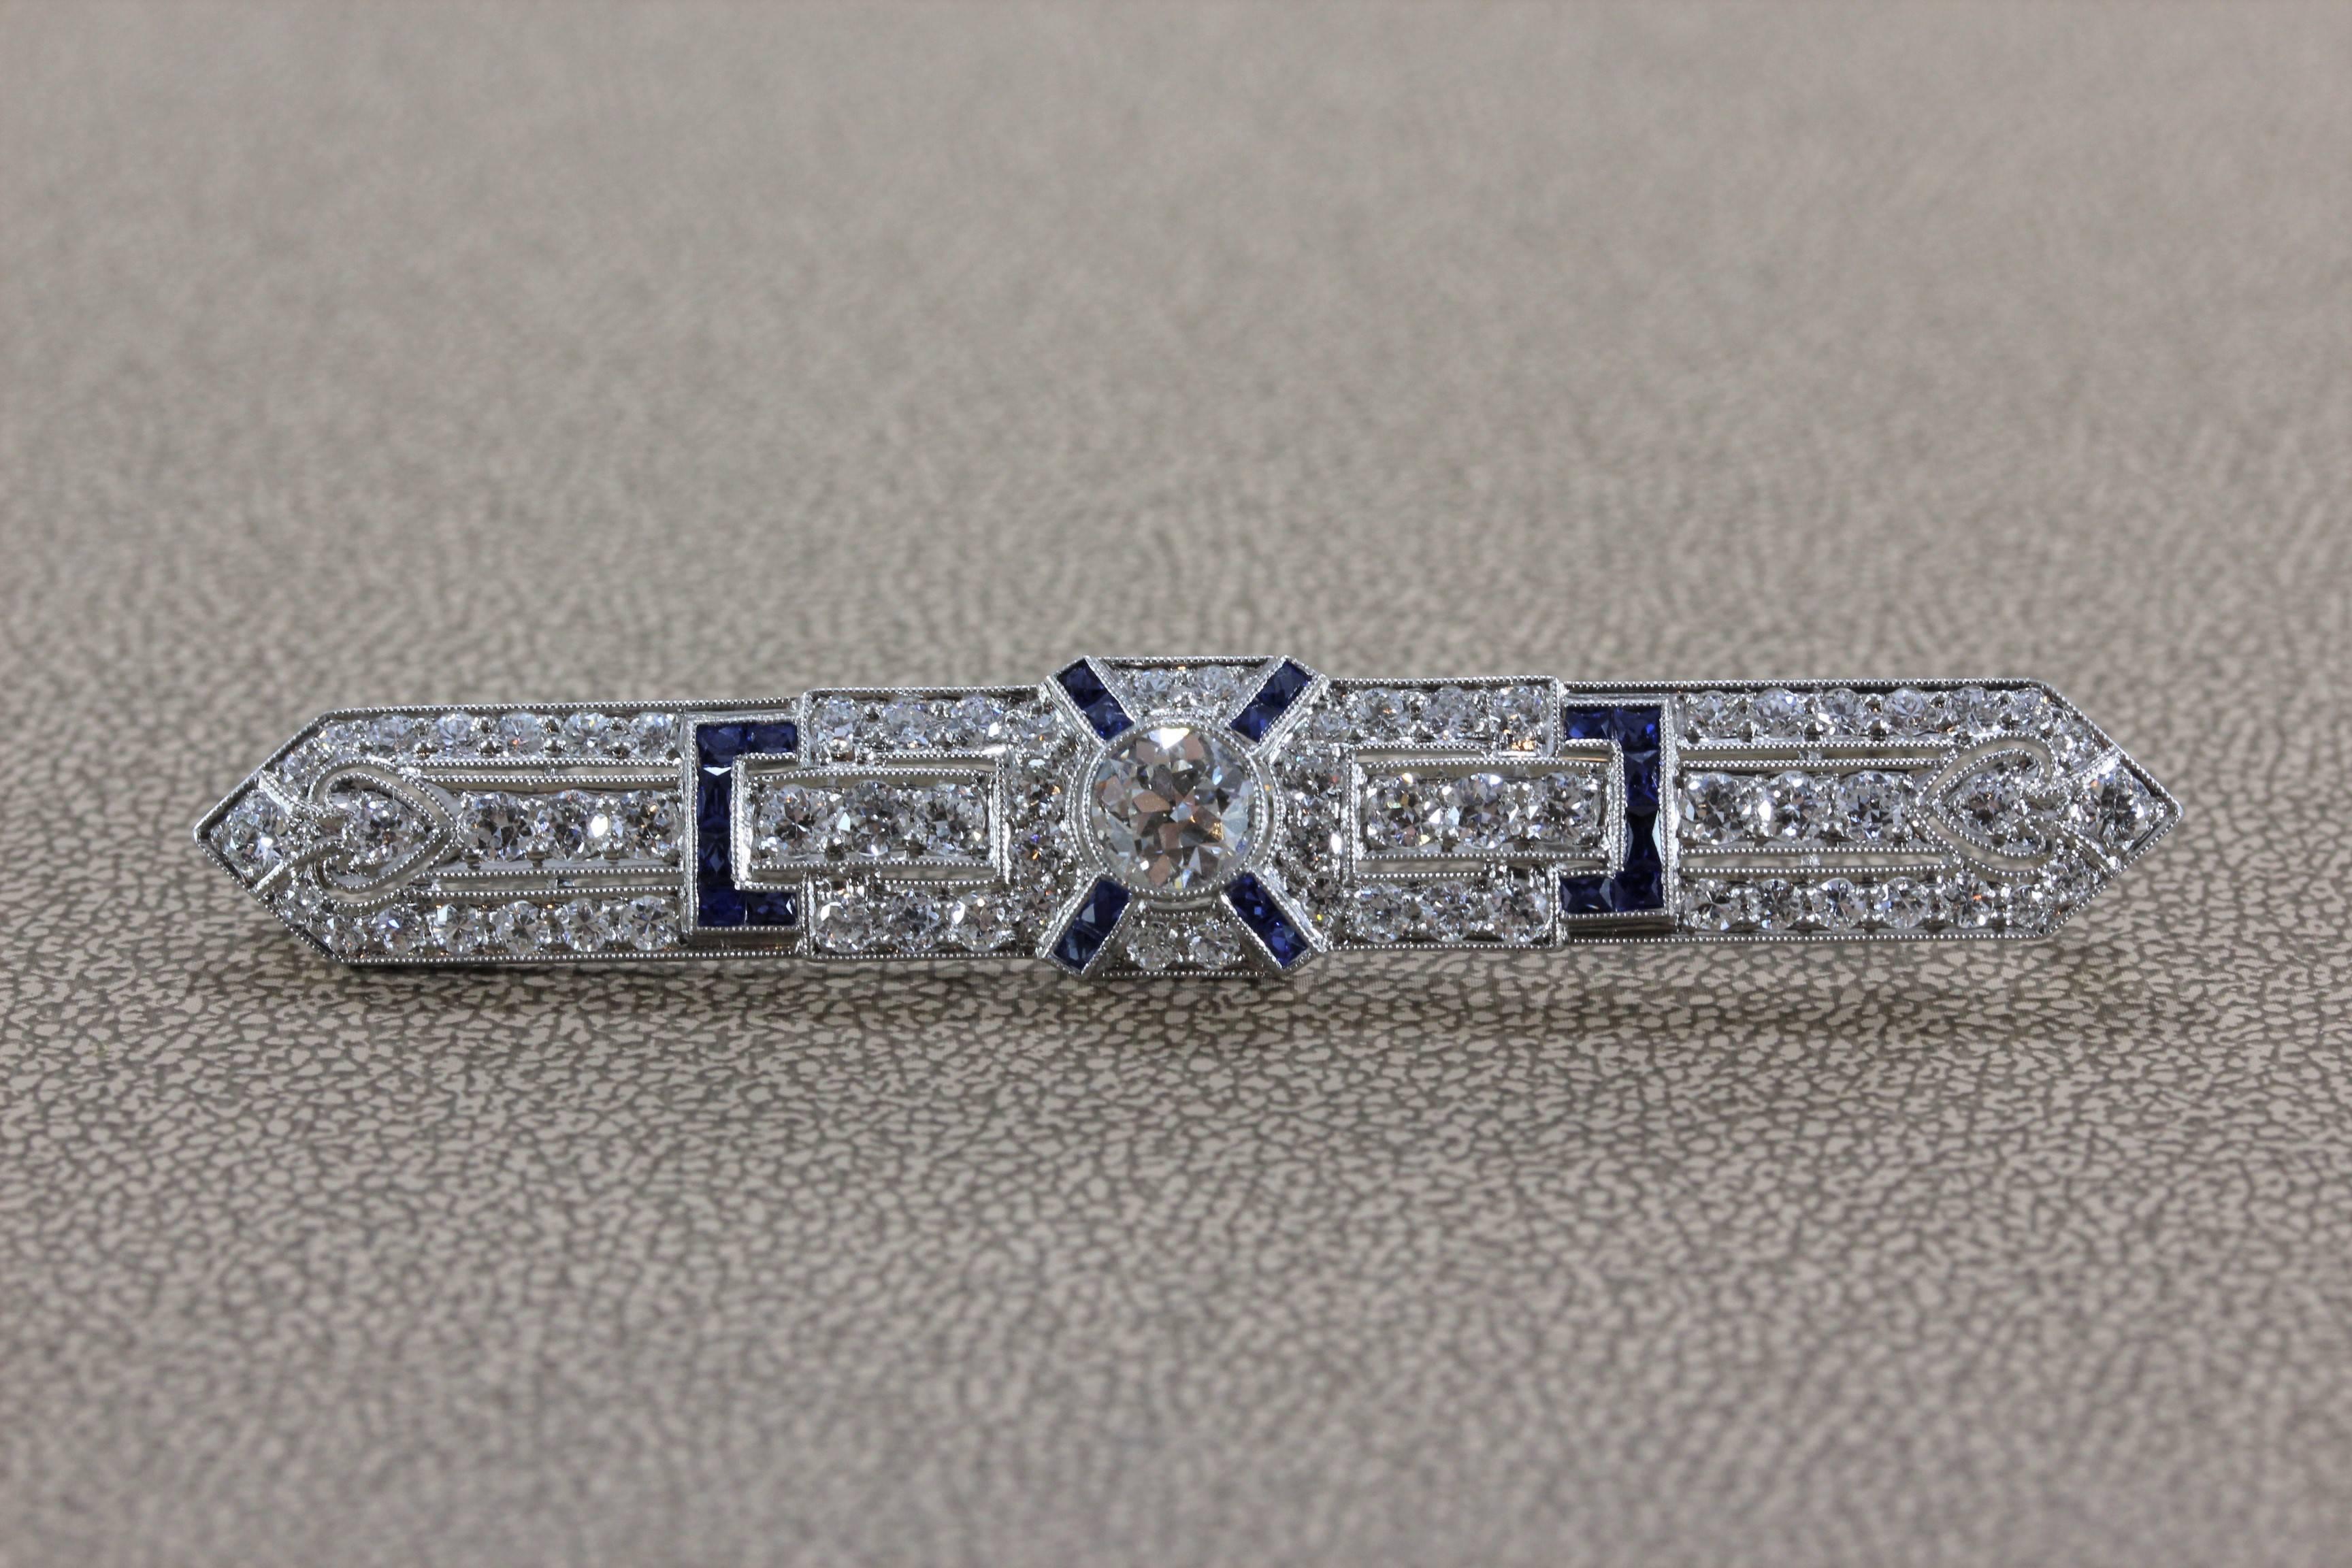 A superb Art Deco diamond and sapphire bar pin featuring a center diamond weighting approximately 1 carat. Around the center diamond are 4 carats of old cut diamonds and blue sapphire, set in platinum. A brooch from the early 20th century with a